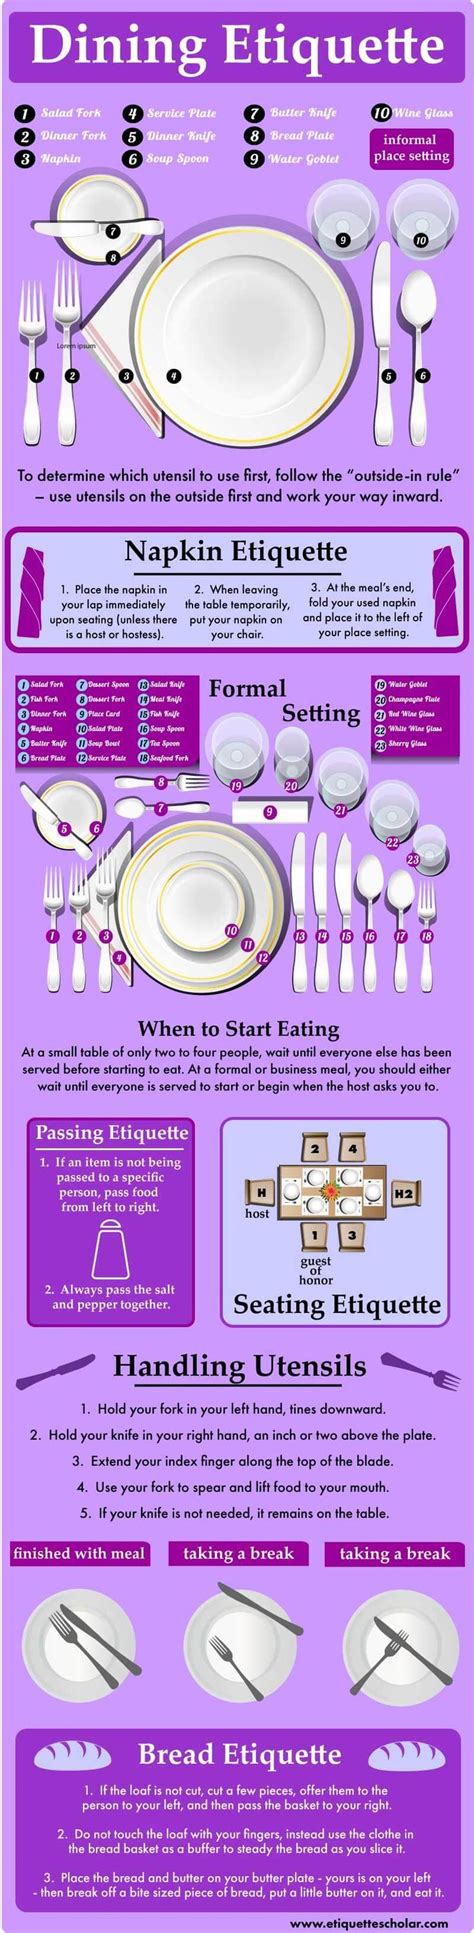 a purple and white poster with different types of plates, knives, spoons and utensils